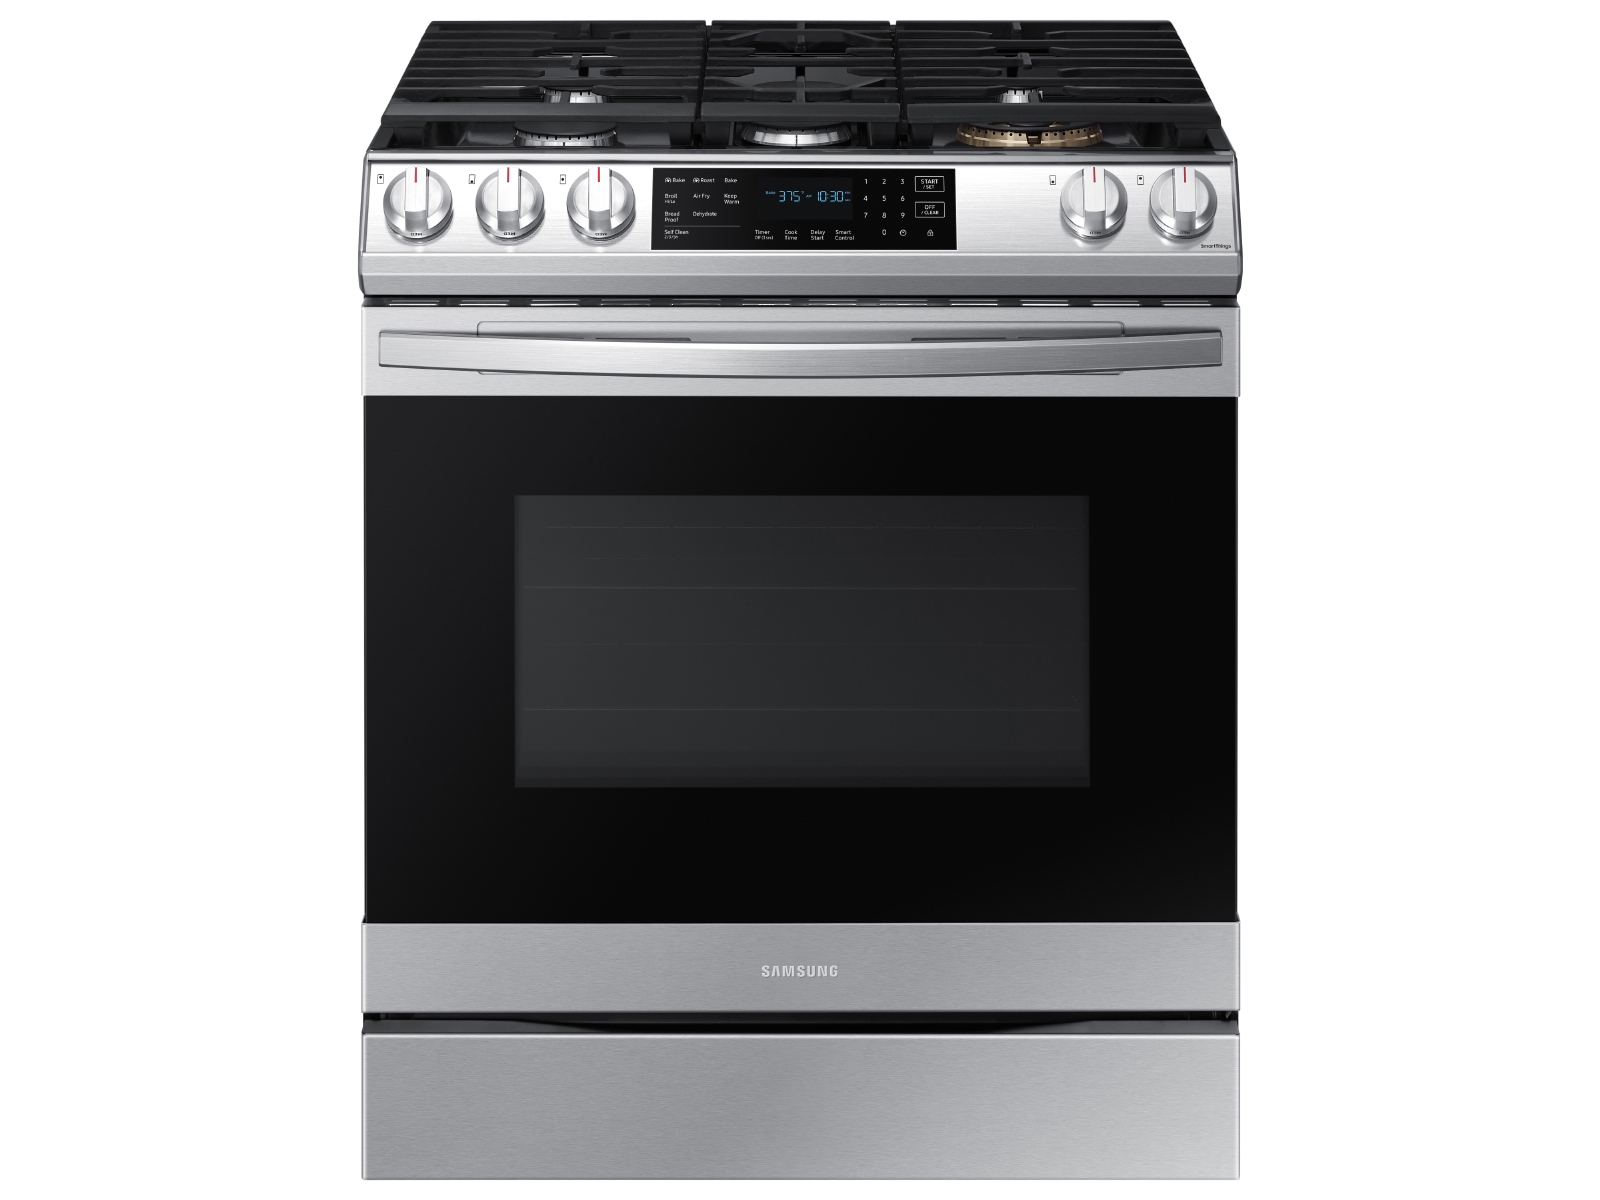 Photos - Cooker Samsung 6.0 cu. ft. Smart Slide-in Gas Range with Air Fry in Silver(NX60T8 